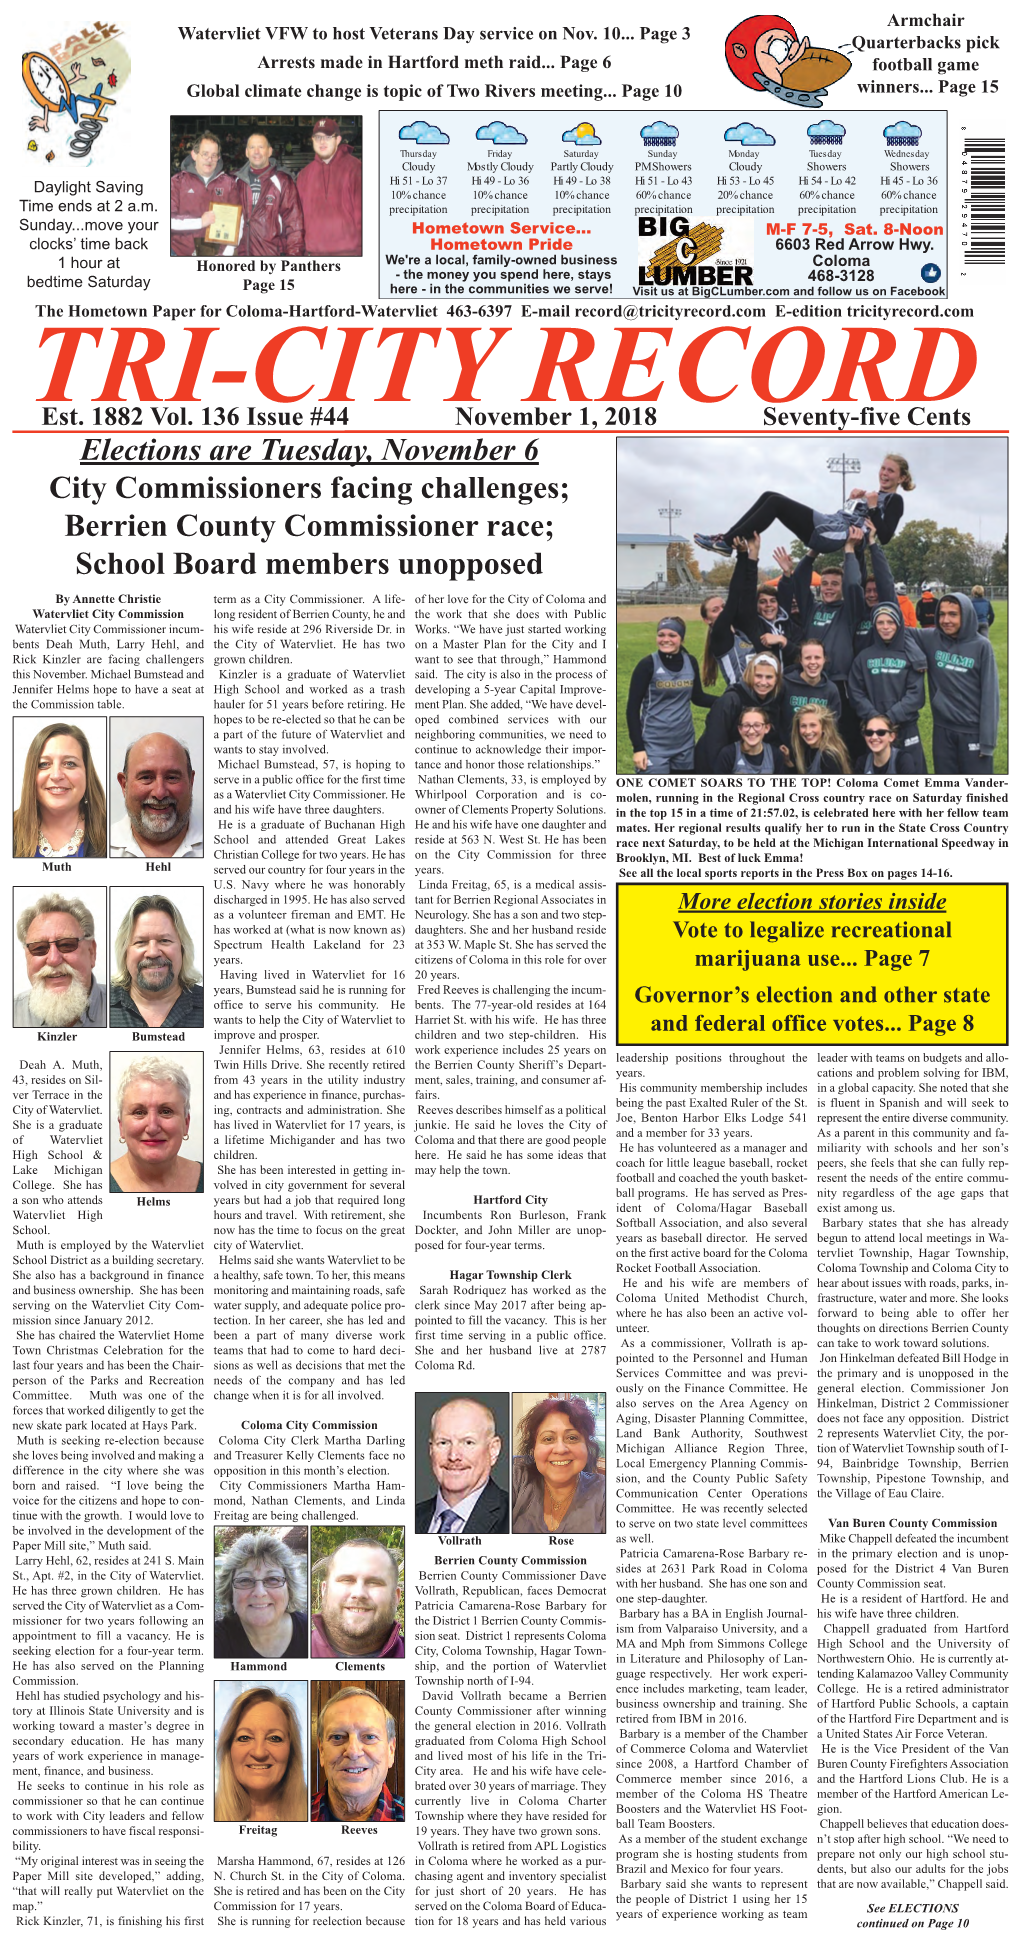 Elections Are Tuesday, November 6 City Commissioners Facing Challenges; Berrien County Commissioner Race; School Board Members U